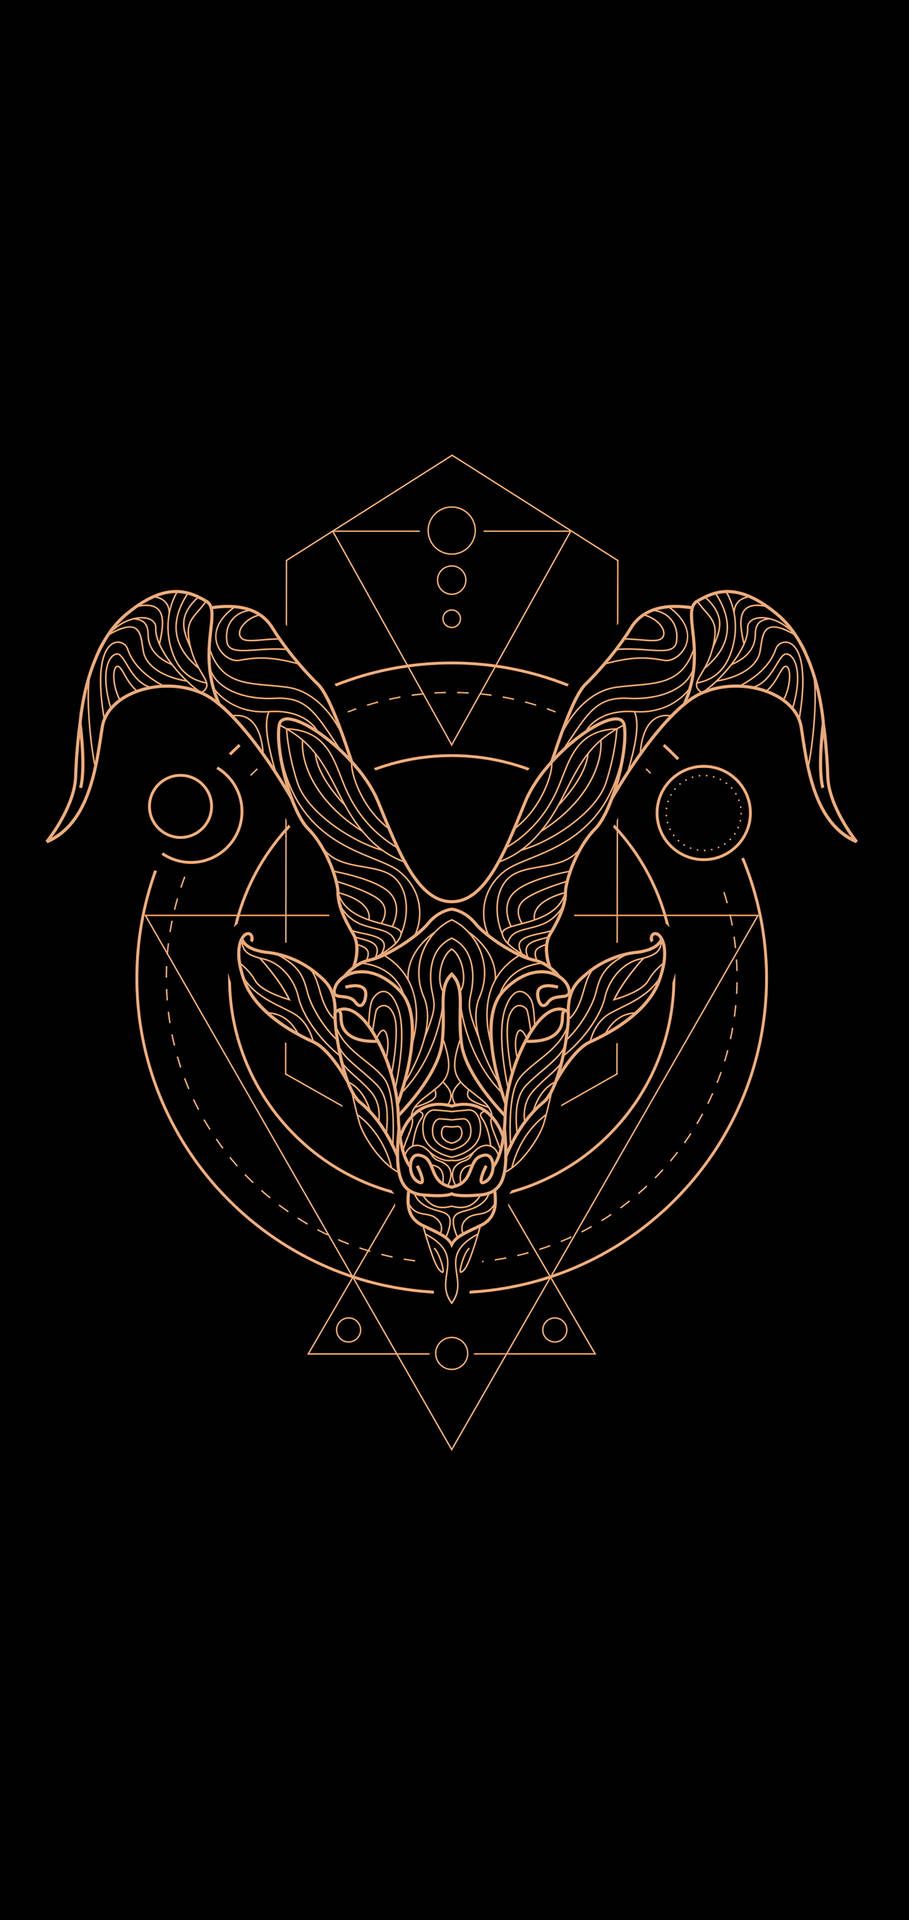 A ram with horns and geometric shapes on it - Capricorn